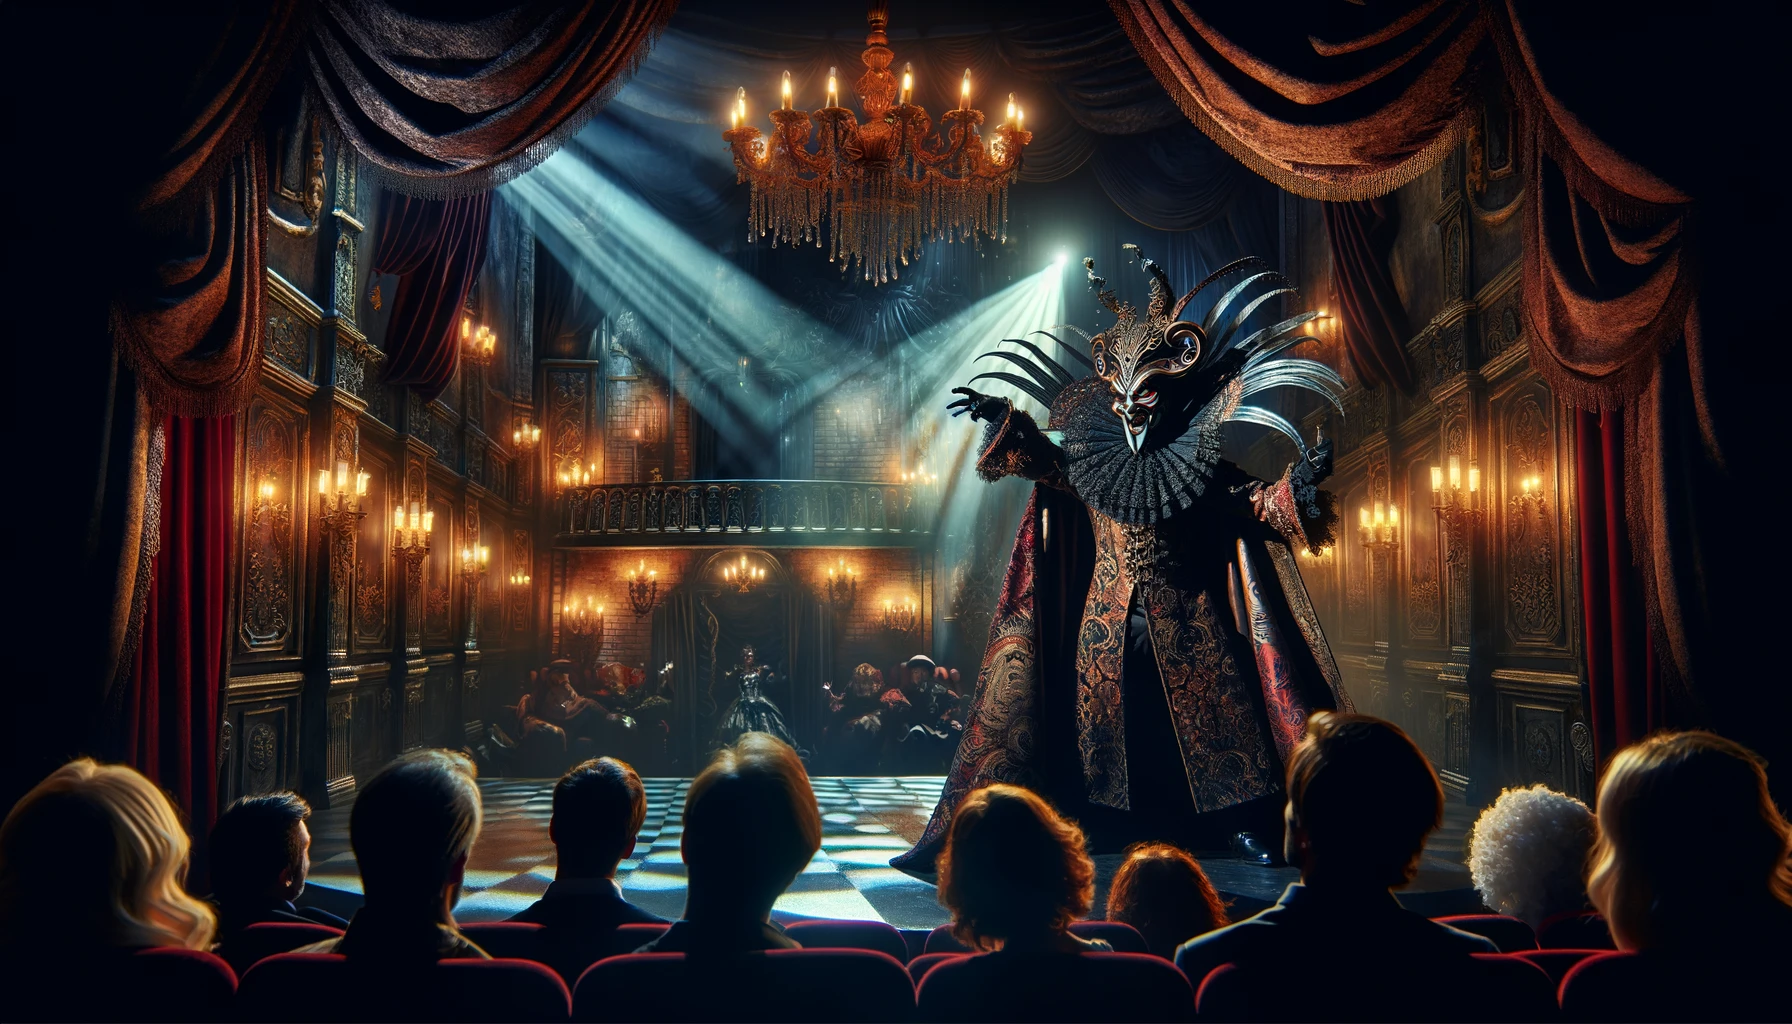 An image capturing the allure of villains in entertainment. The scene is a dramatic, theatrical setting with a charismatic villain at the center, dressed in an elaborate costume with dark, rich colors and intricate patterns. The villain is performing on stage, captivating the audience with a powerful monologue. The background is a lavishly decorated theater, with velvet curtains and vintage decor, illuminated by spotlights that enhance the mysterious and captivating atmosphere. The audience, visible in the foreground, is enthralled and mesmerized by the performance.